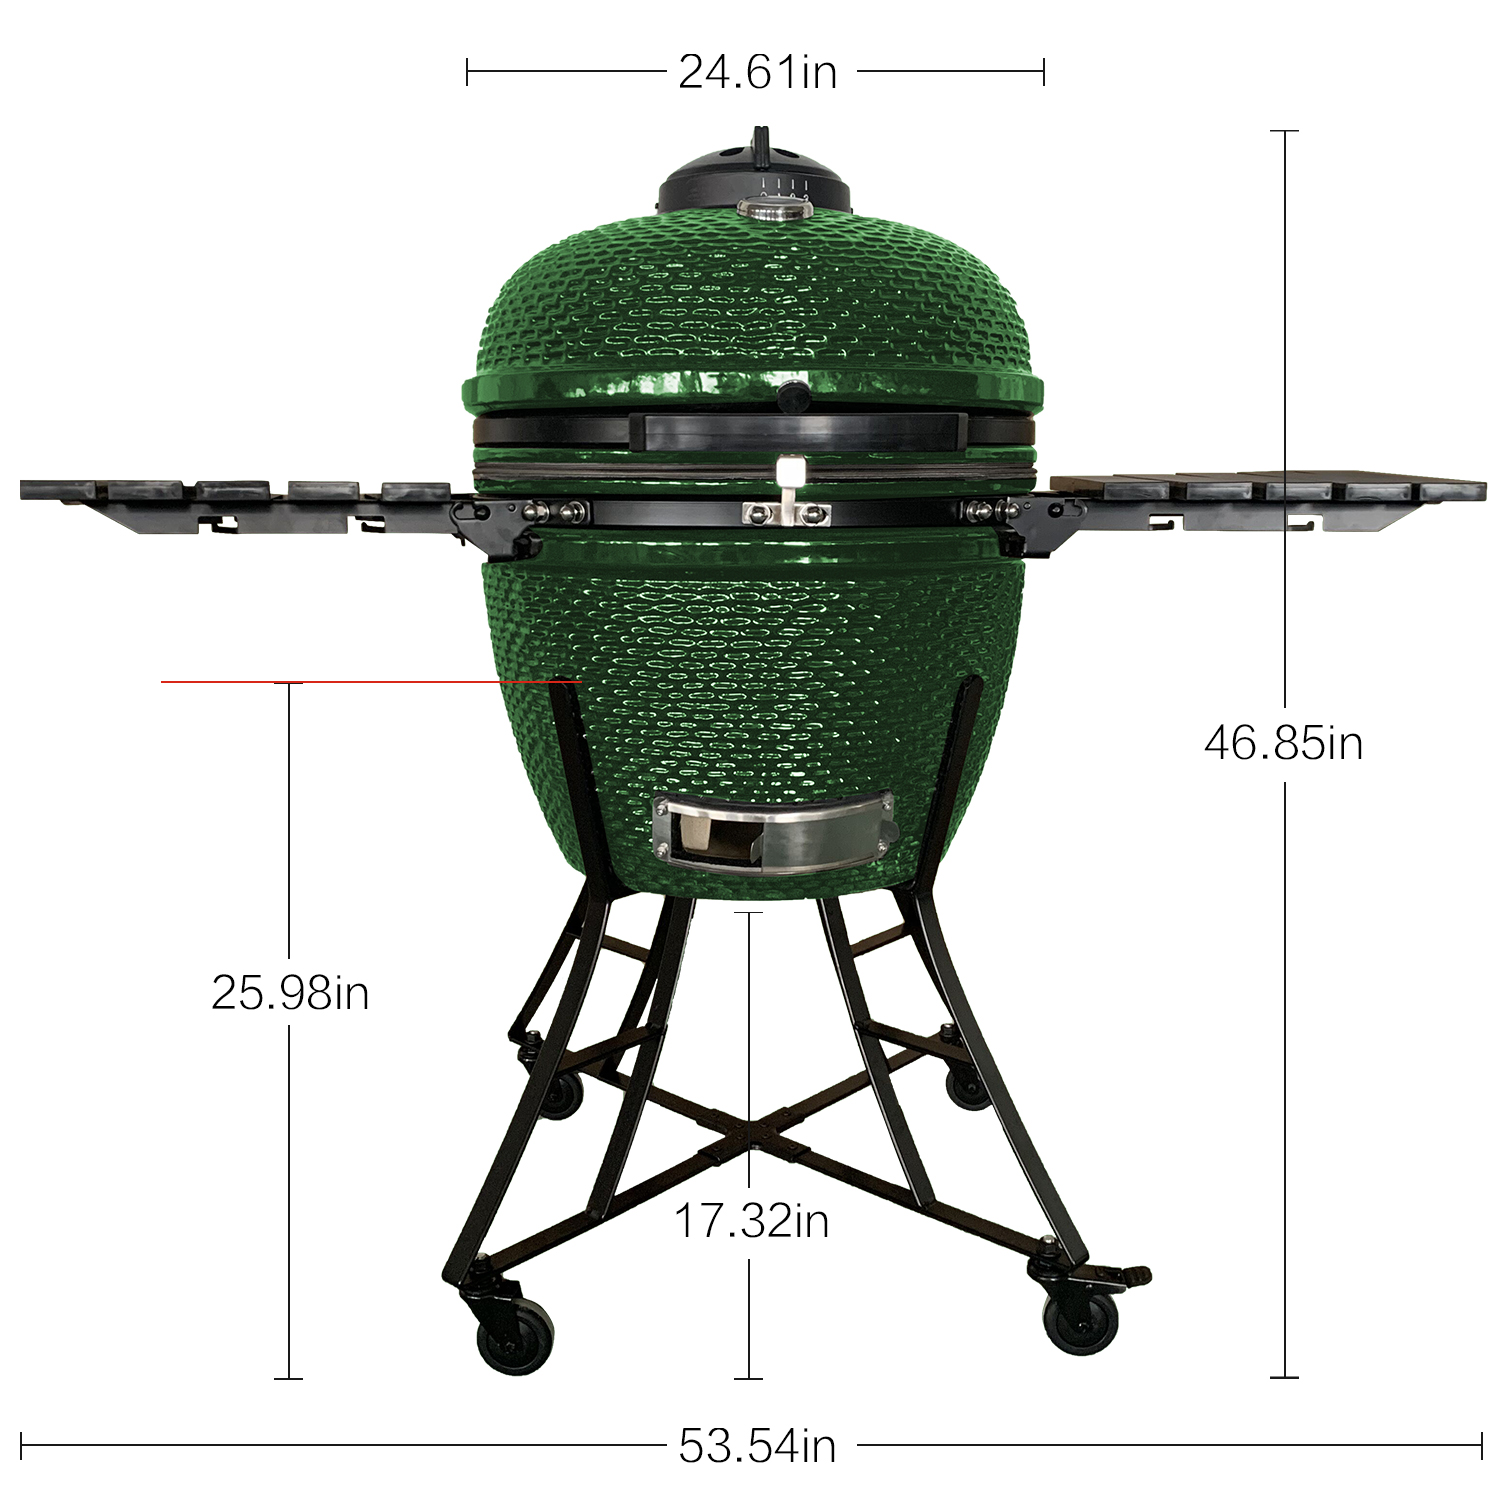 TOOPO 24inch Barbecue Charcoal Grill, Ceramic Kamado Grill with Side Table, Suitable for Camping and Picnic,GREEN-Boyel Living